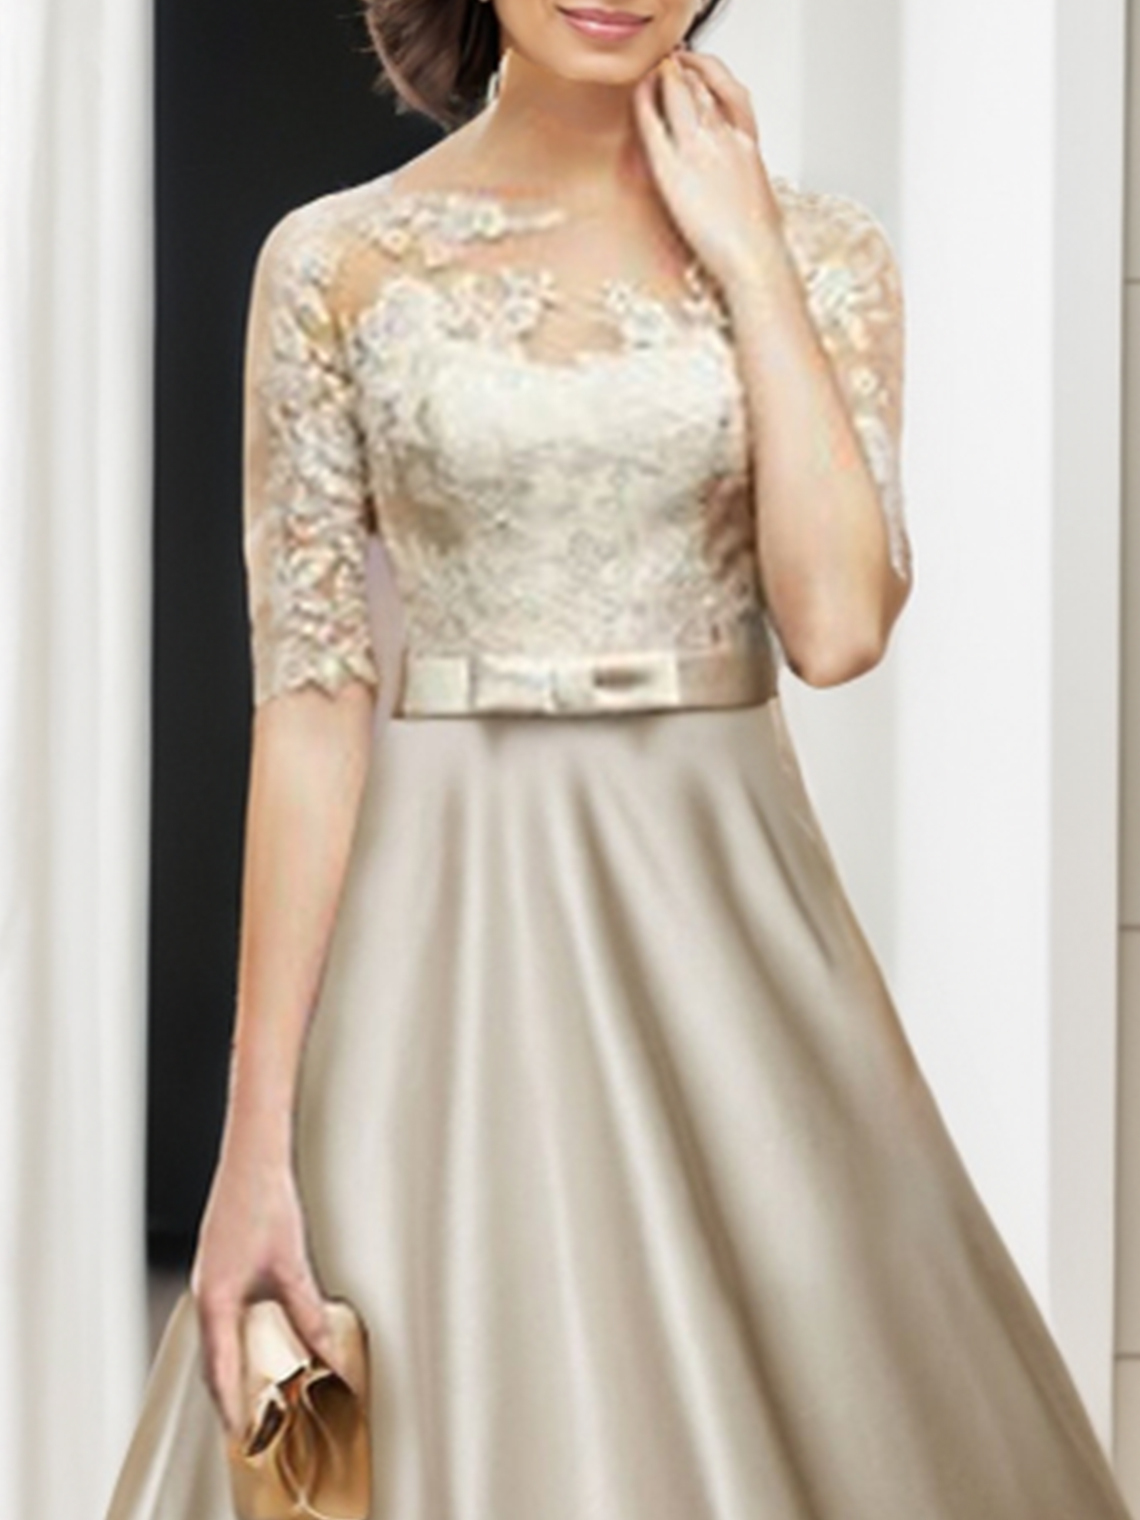 Sheath/Column Elegant Mother of the Bride Dress With Bow(s) Pleats 